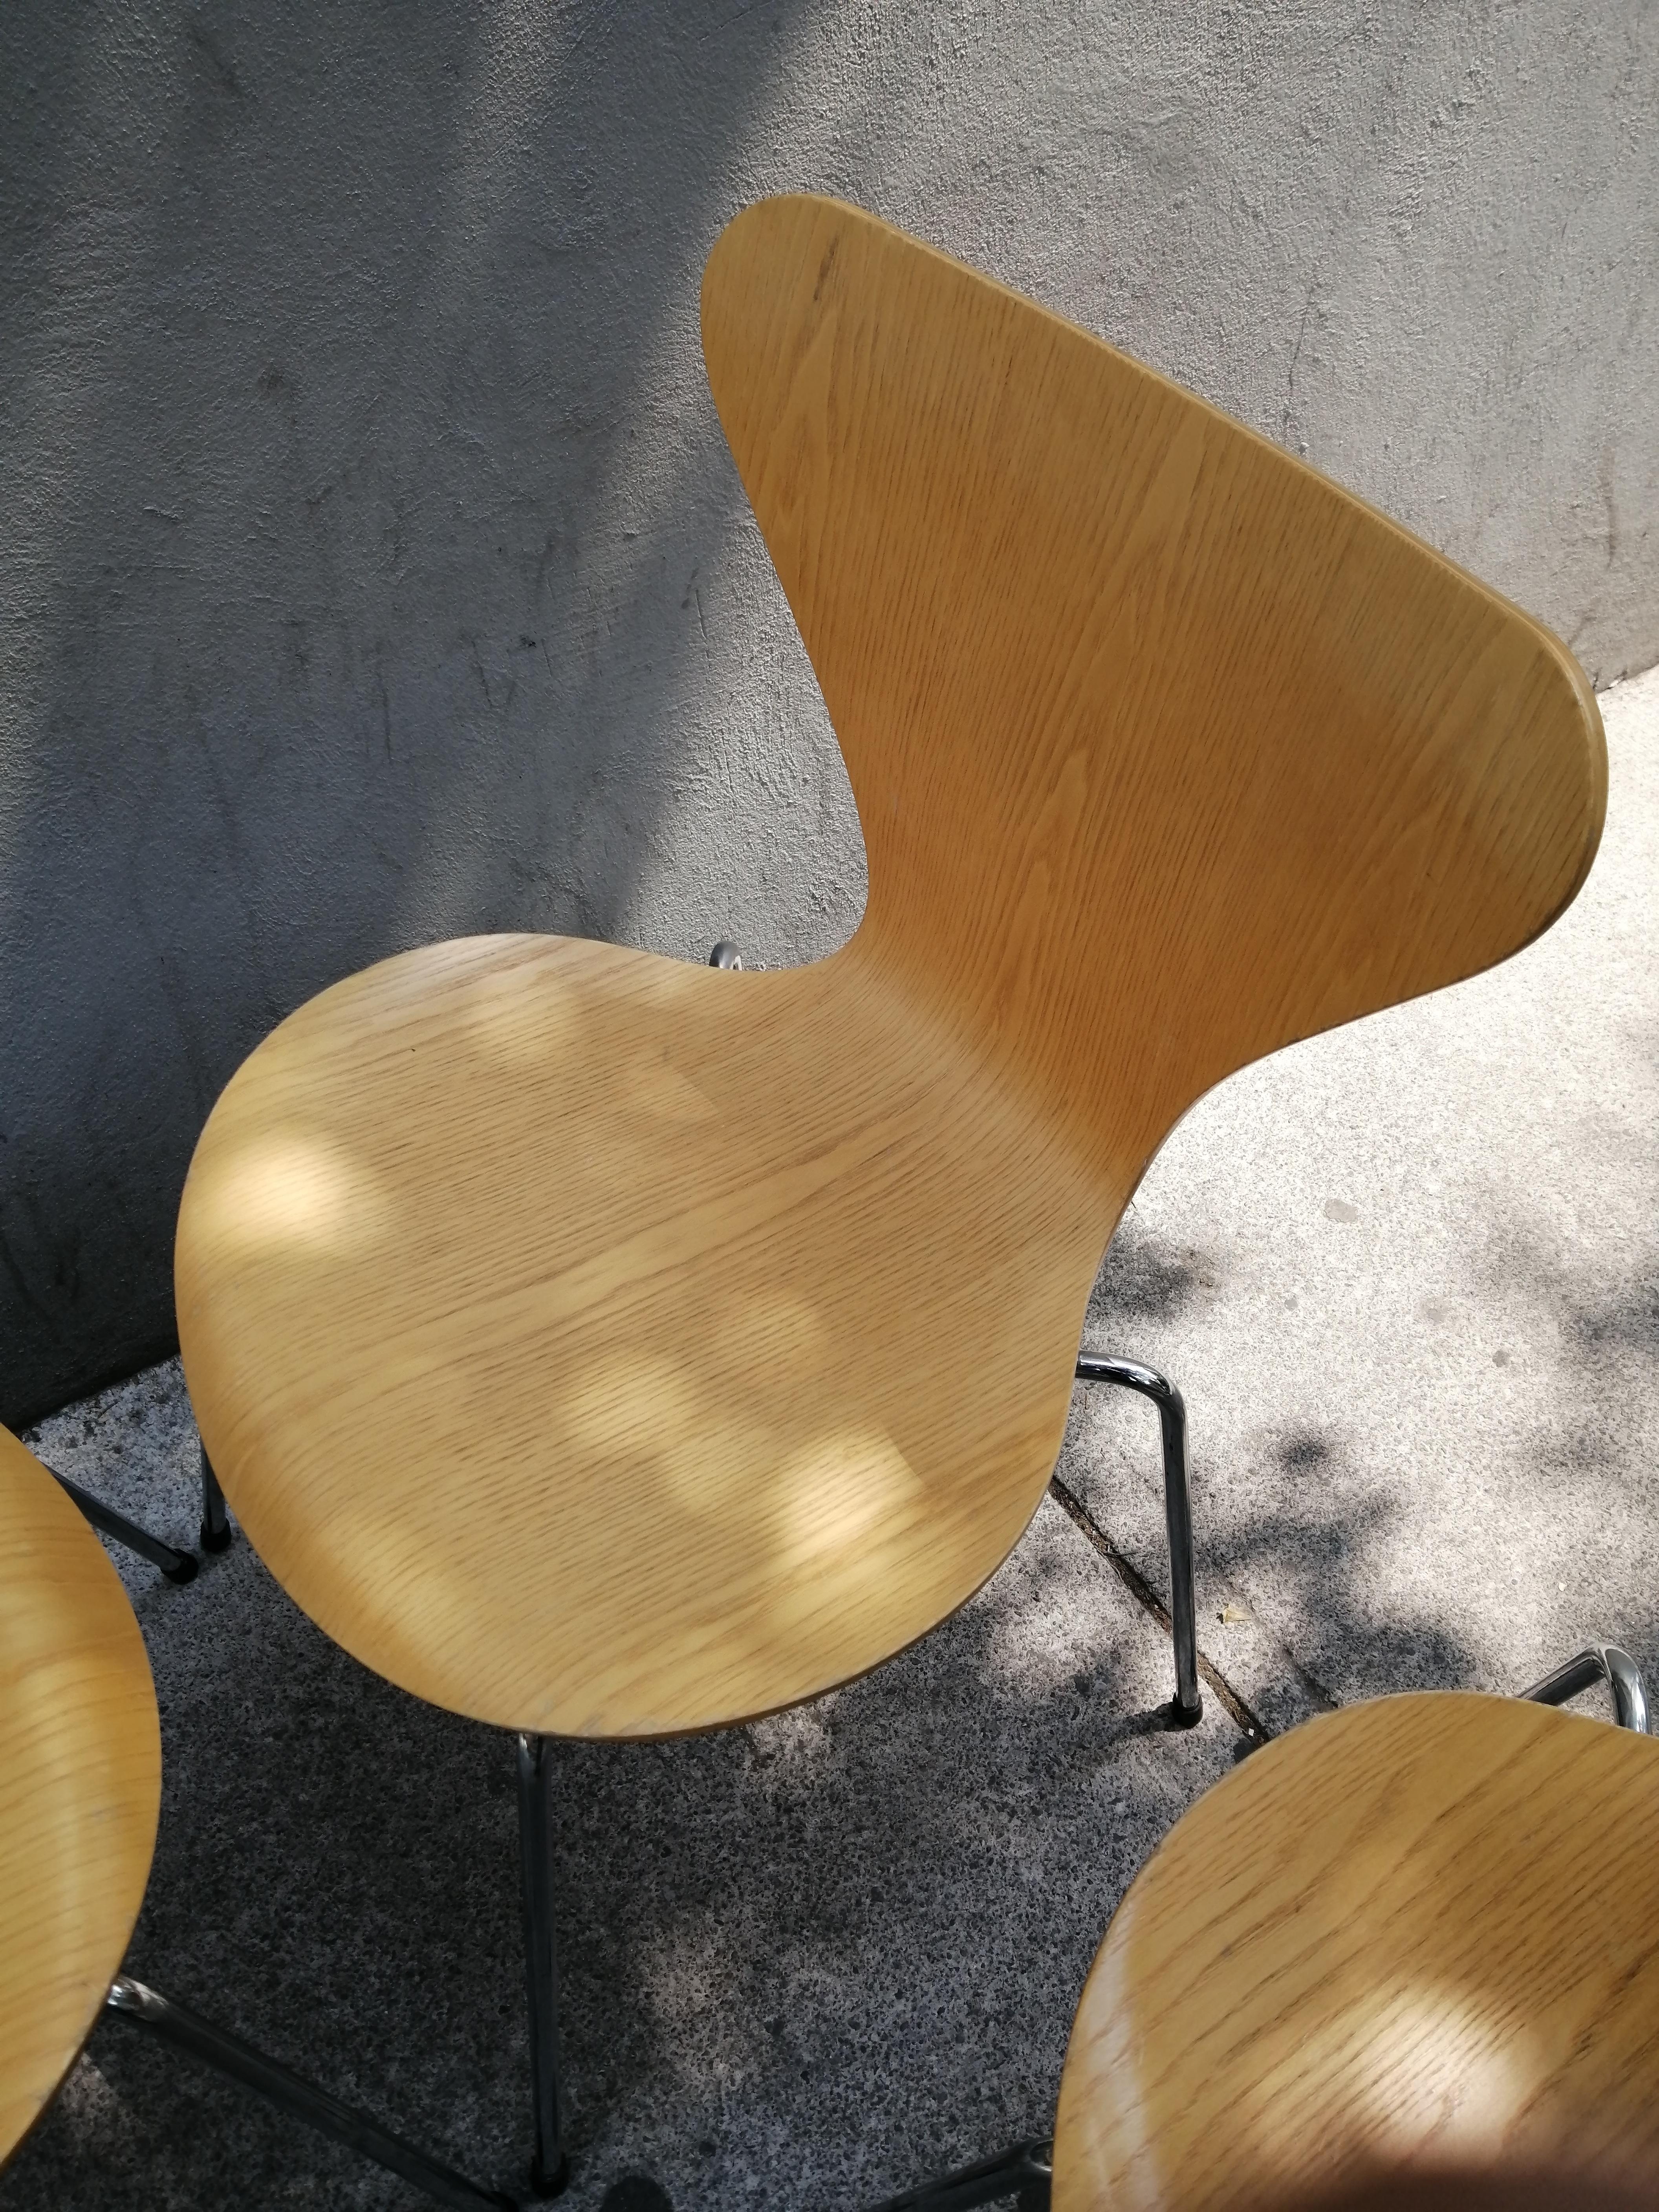 Arne Jacobsen Set of 4 Model 3107 Chairs In Good Condition For Sale In Mexico City, MX